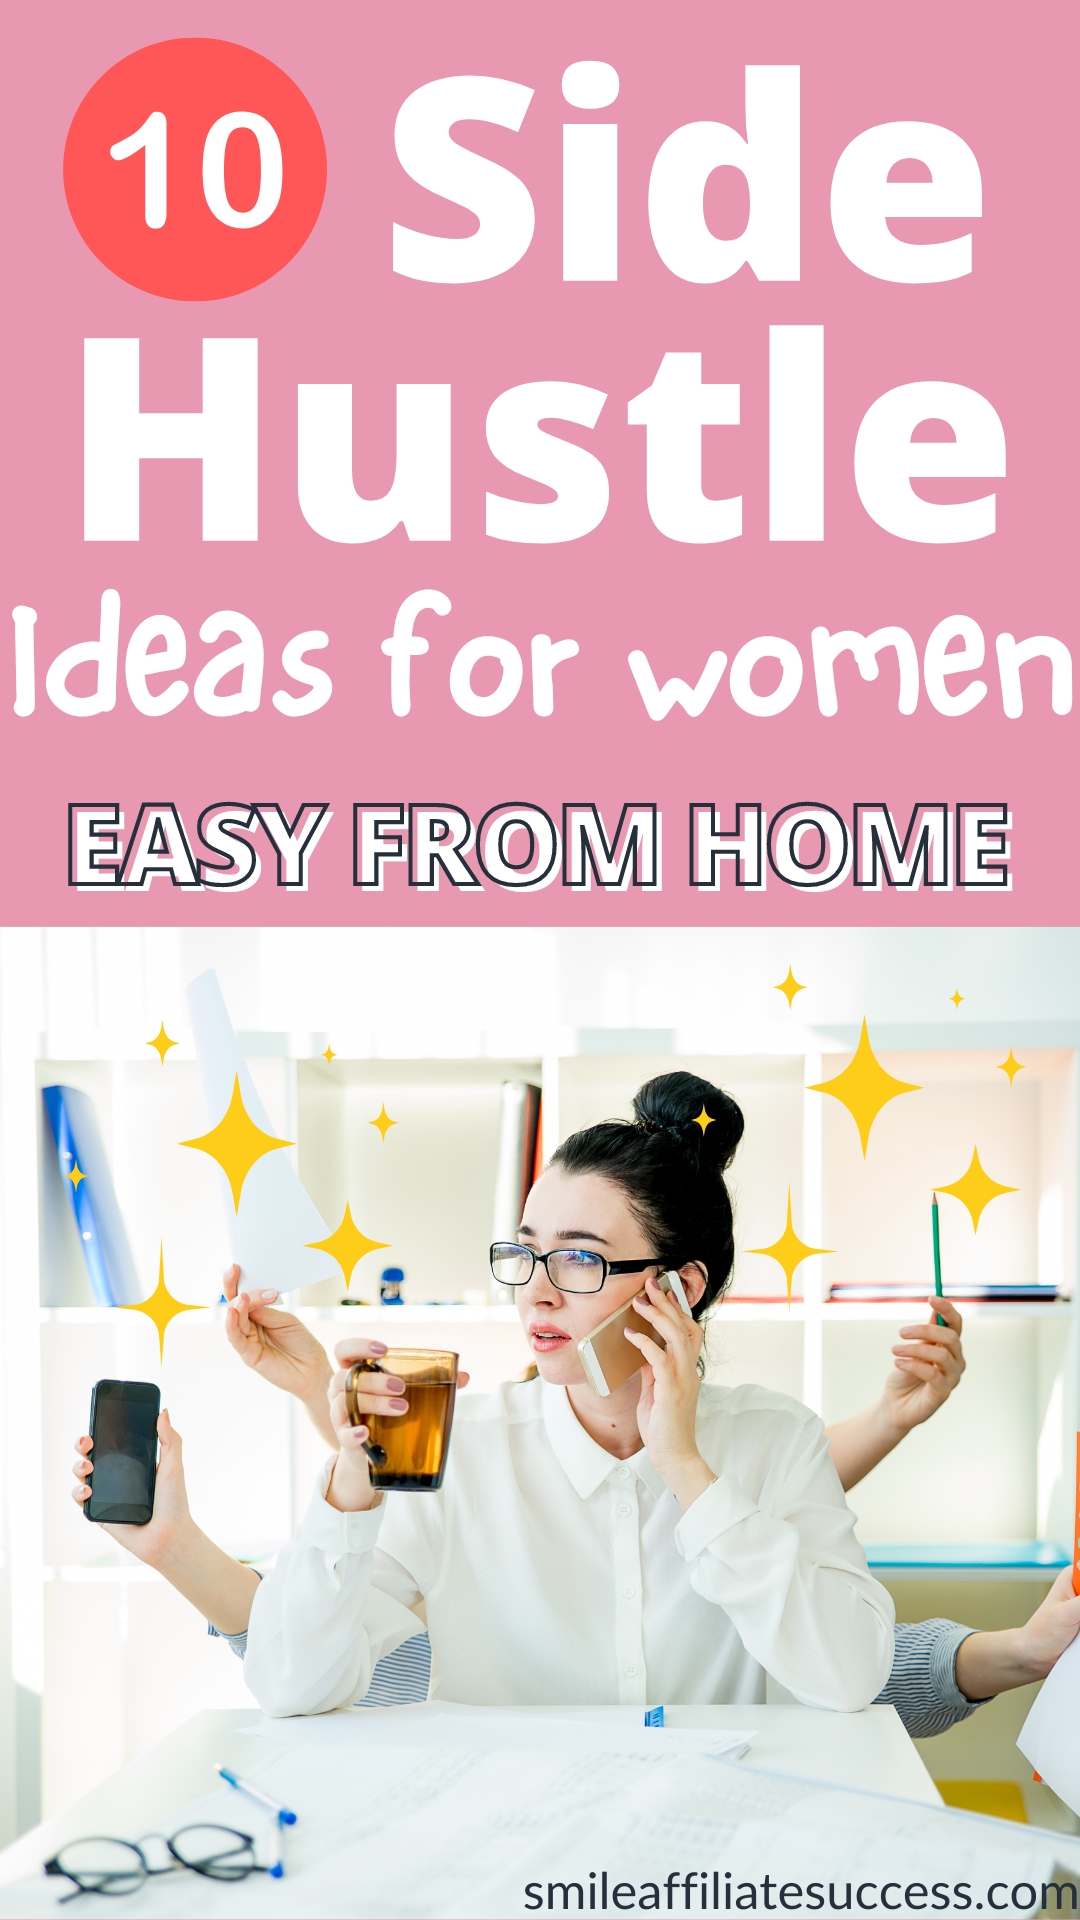 10 Best Side Hustle Ideas to Make A Full-Time Income - Easy From Home!